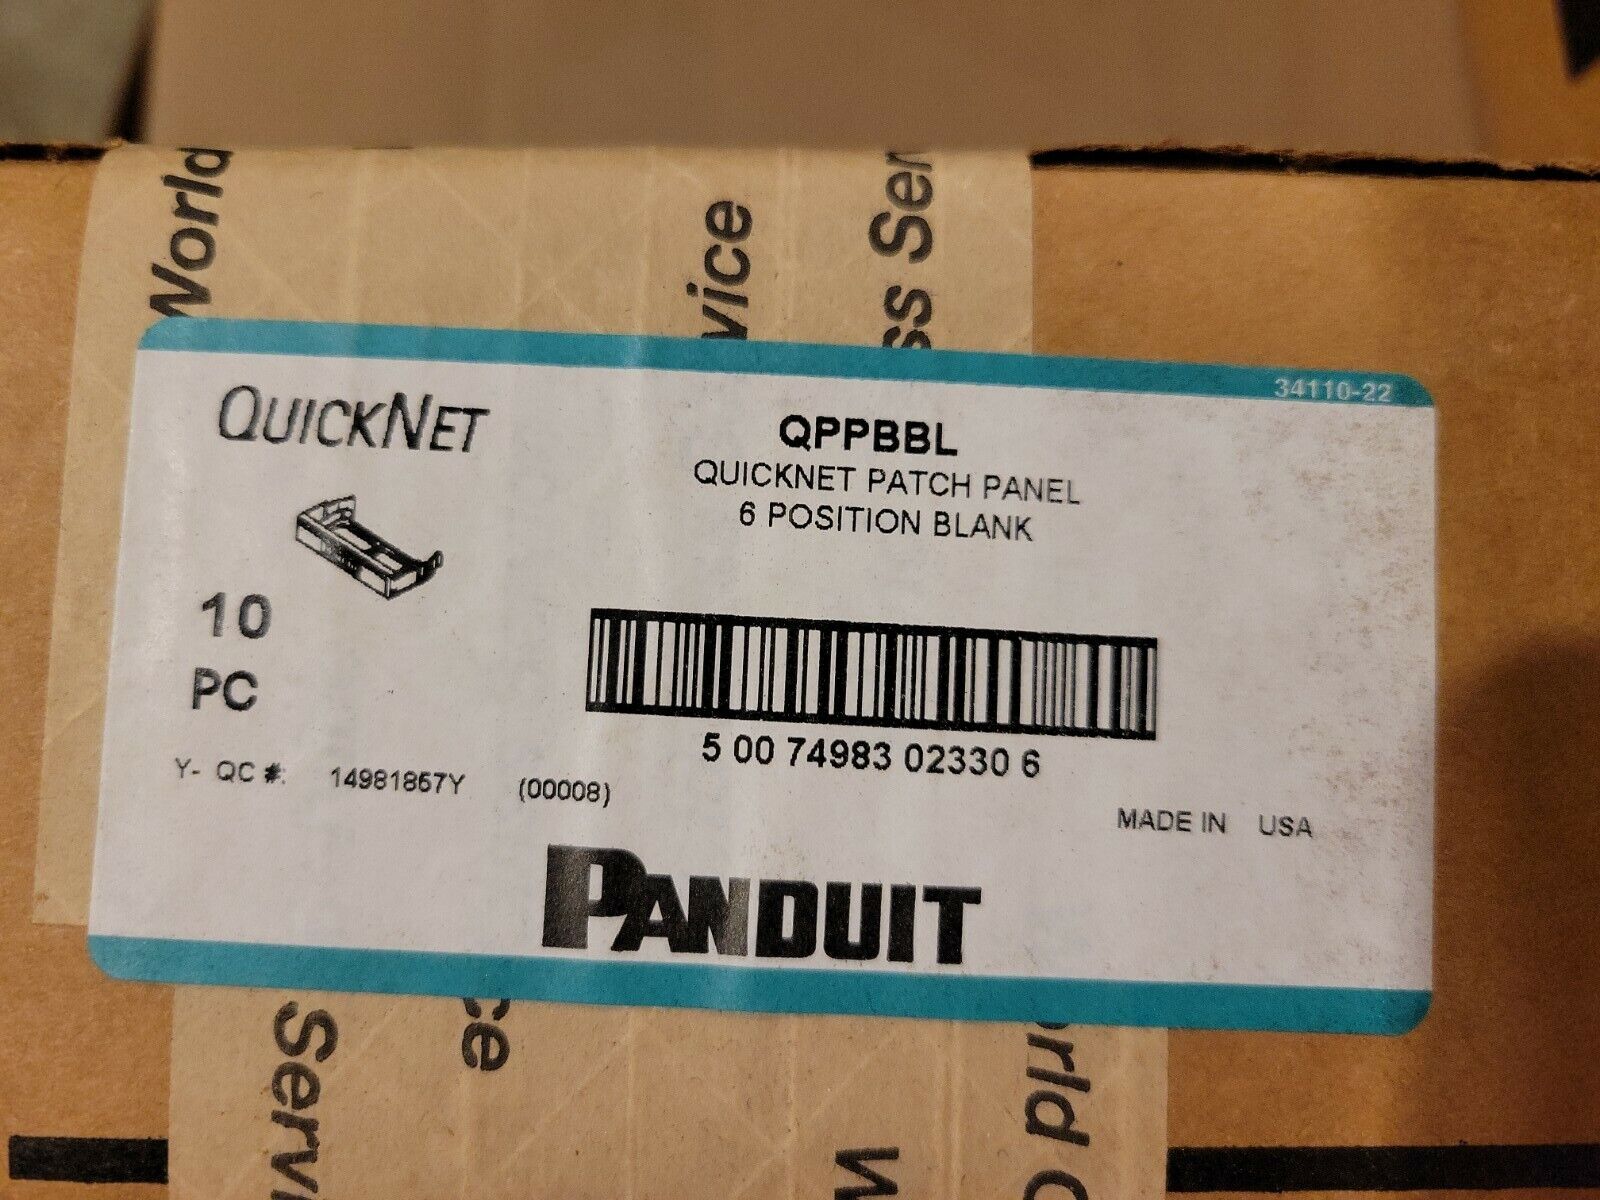 QPPBBL--PANDUIT--Box of 10--QuickNet Patch Panel 6 Position Blank--NEW